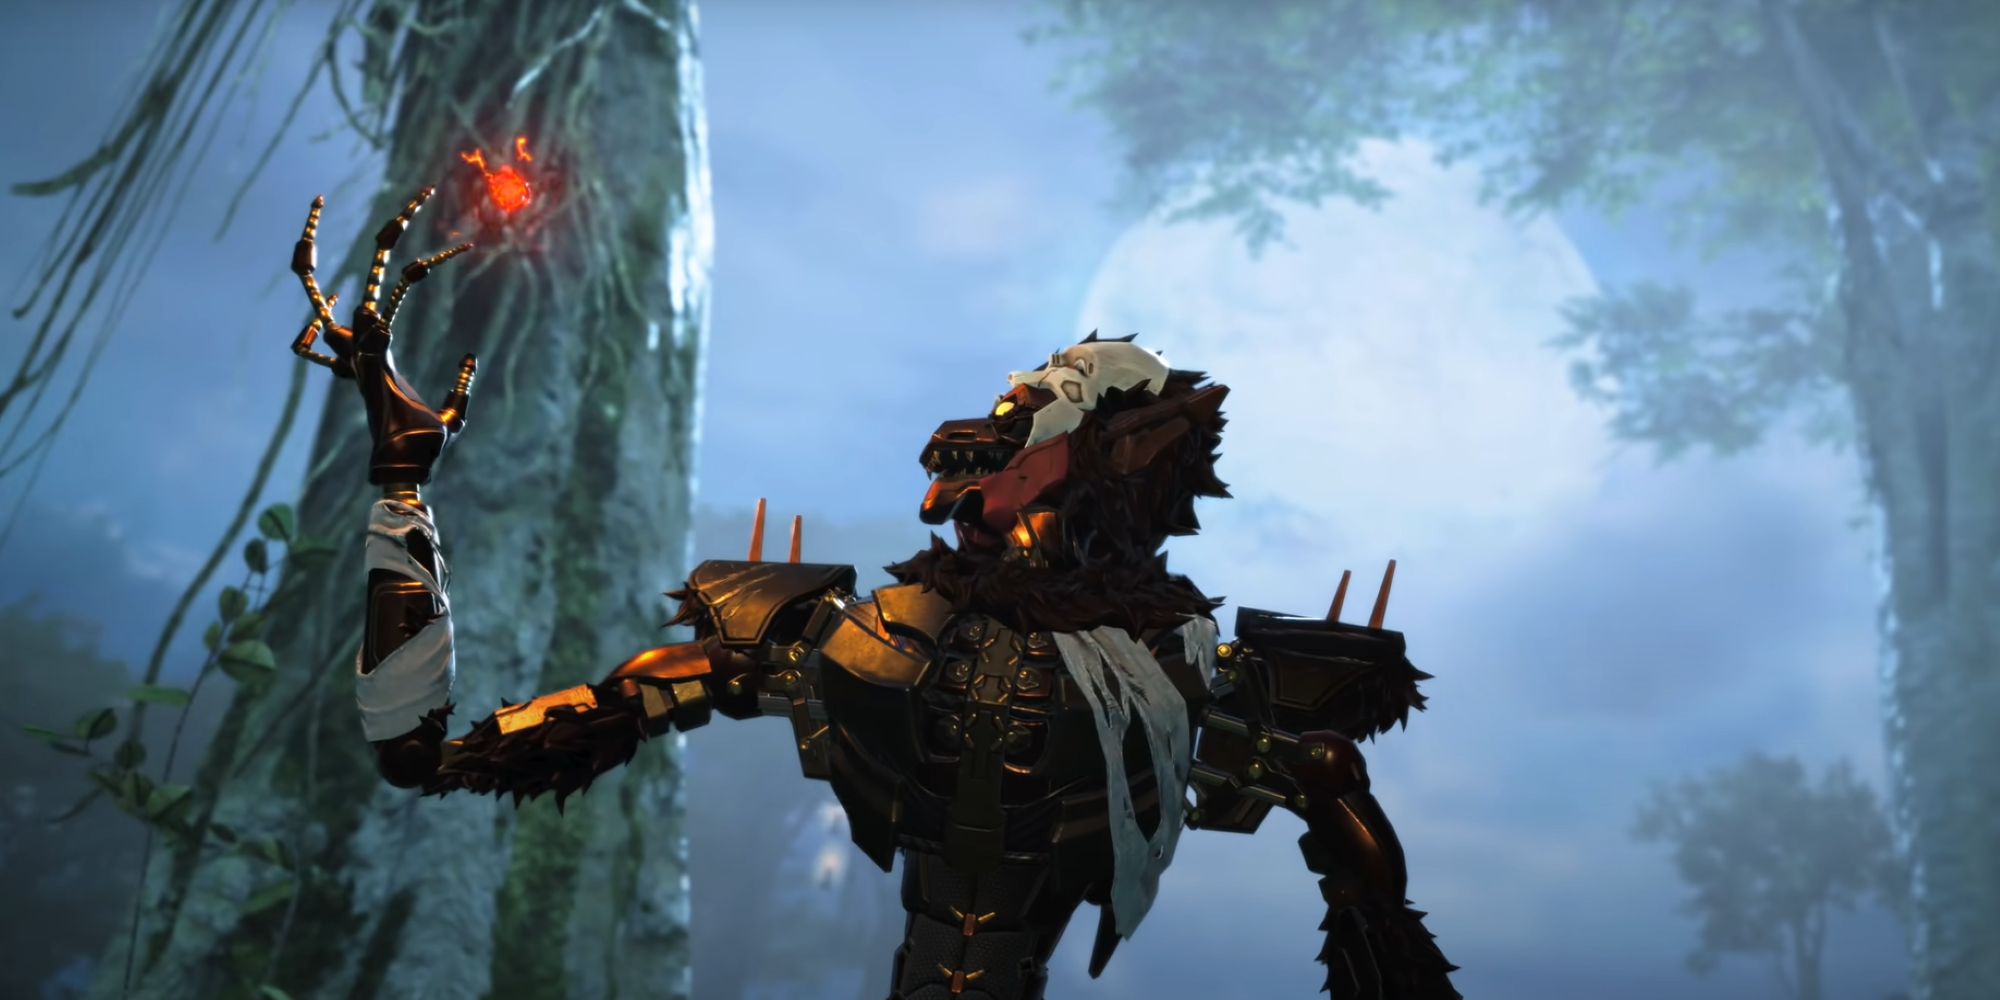 A monster in Apex Legends